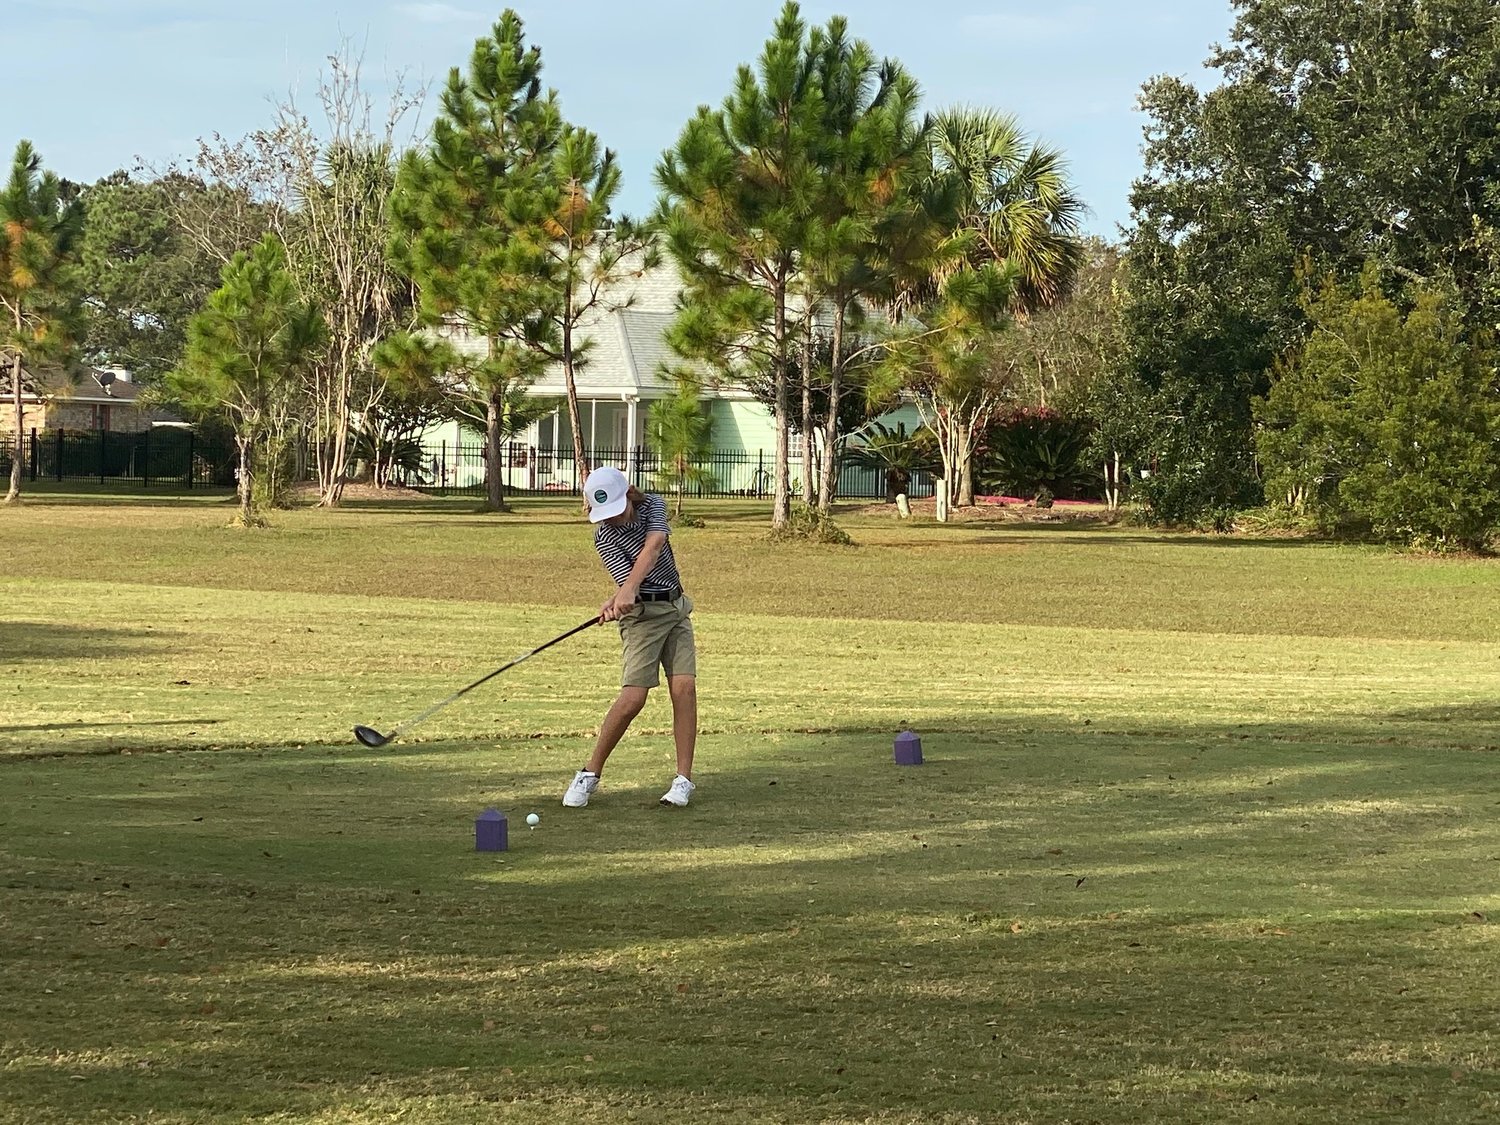 Local athletes who have participated in GlenLakes Golf Club’s Junior Golf Program will soon be eligible for scholarships when graduating high school after the course announced the first-ever scholarship program will be established for this spring’s graduating class.